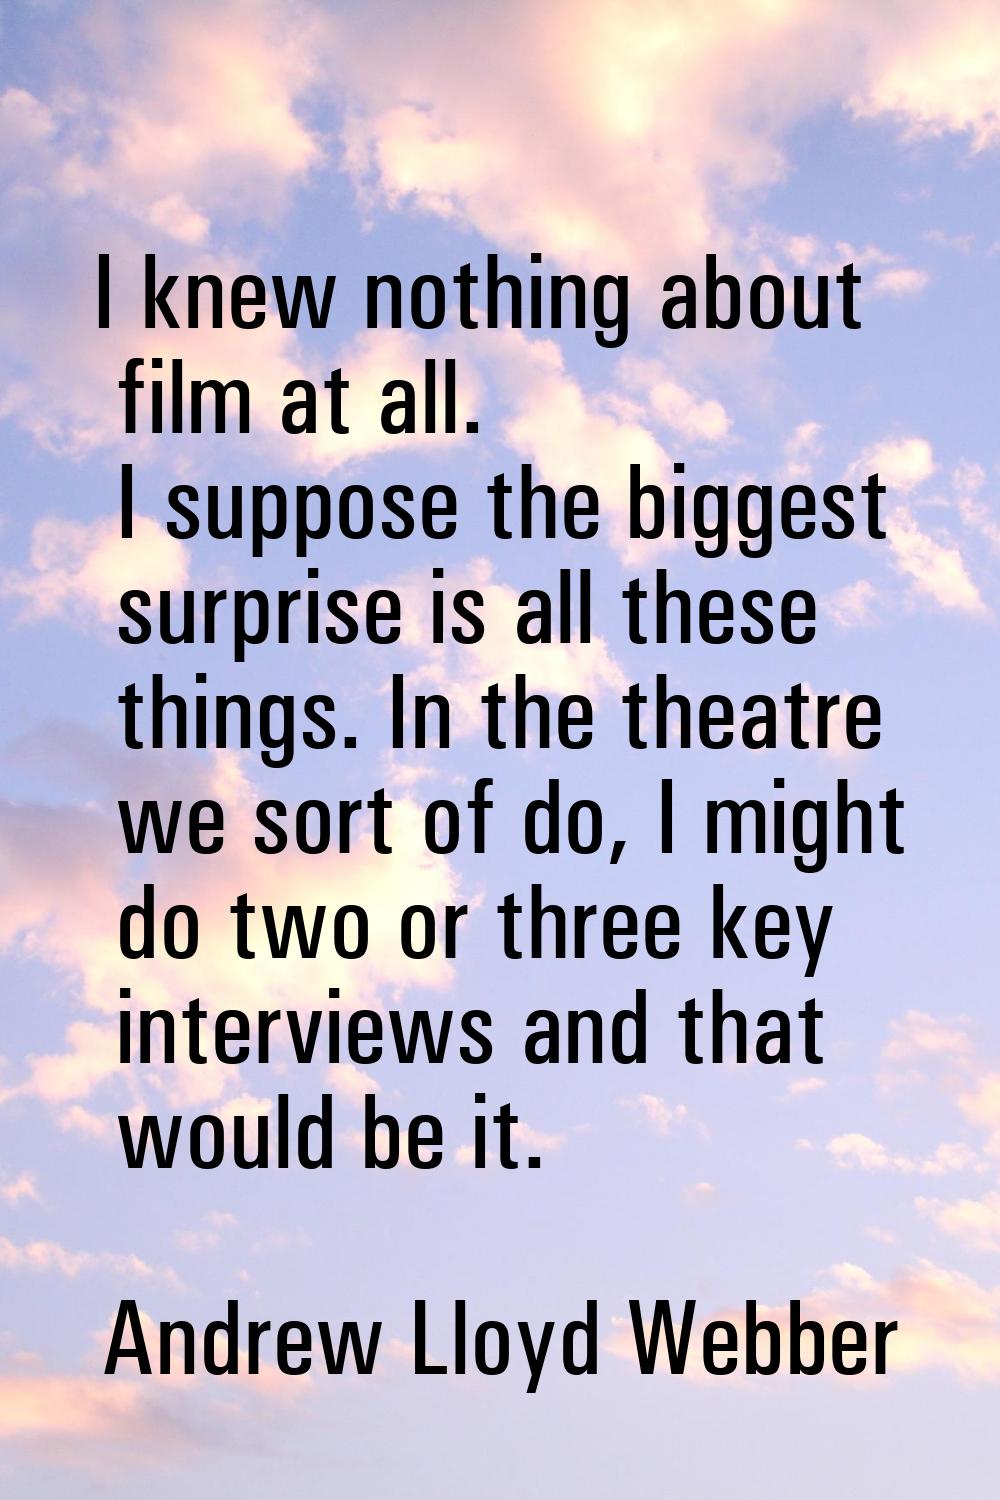 I knew nothing about film at all. I suppose the biggest surprise is all these things. In the theatr